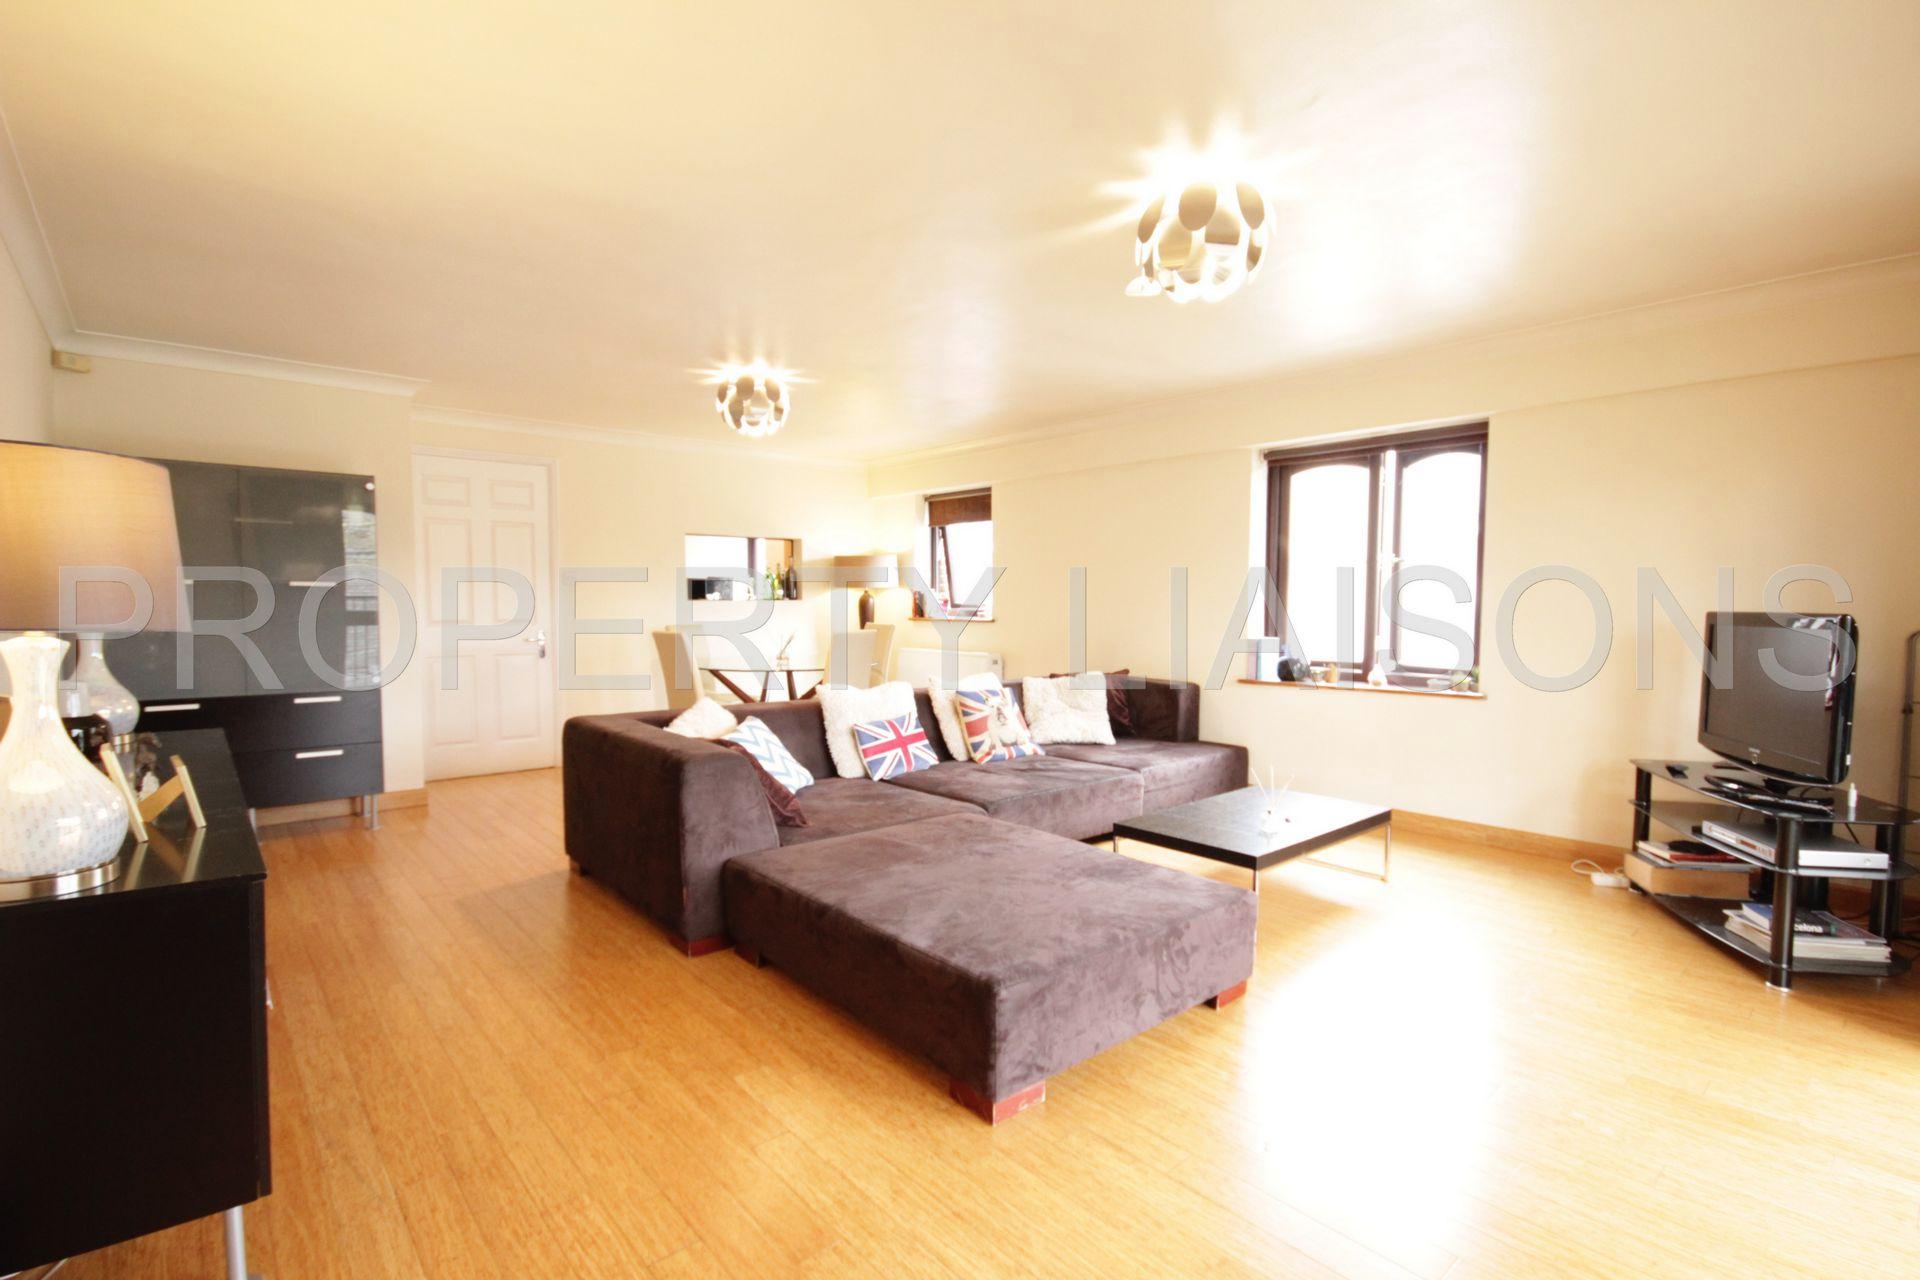 2 Bedroom Apartment to rent in , London, E1